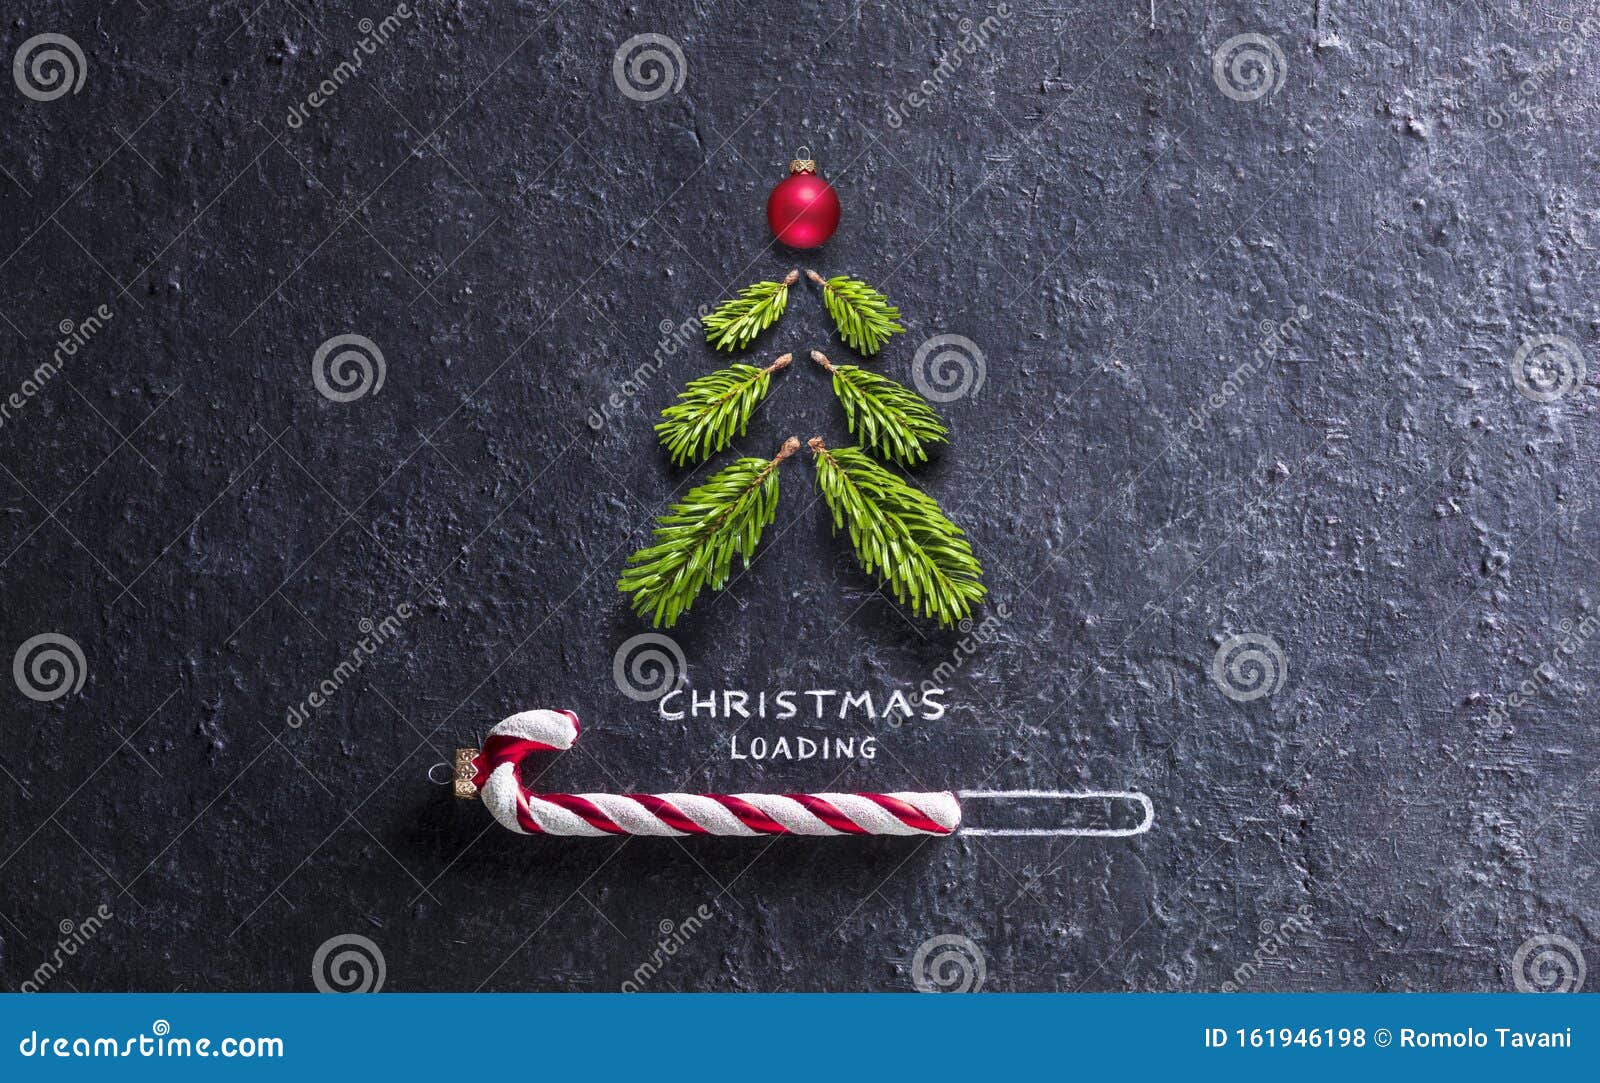 christmas card - loading concept - tree and candy canes